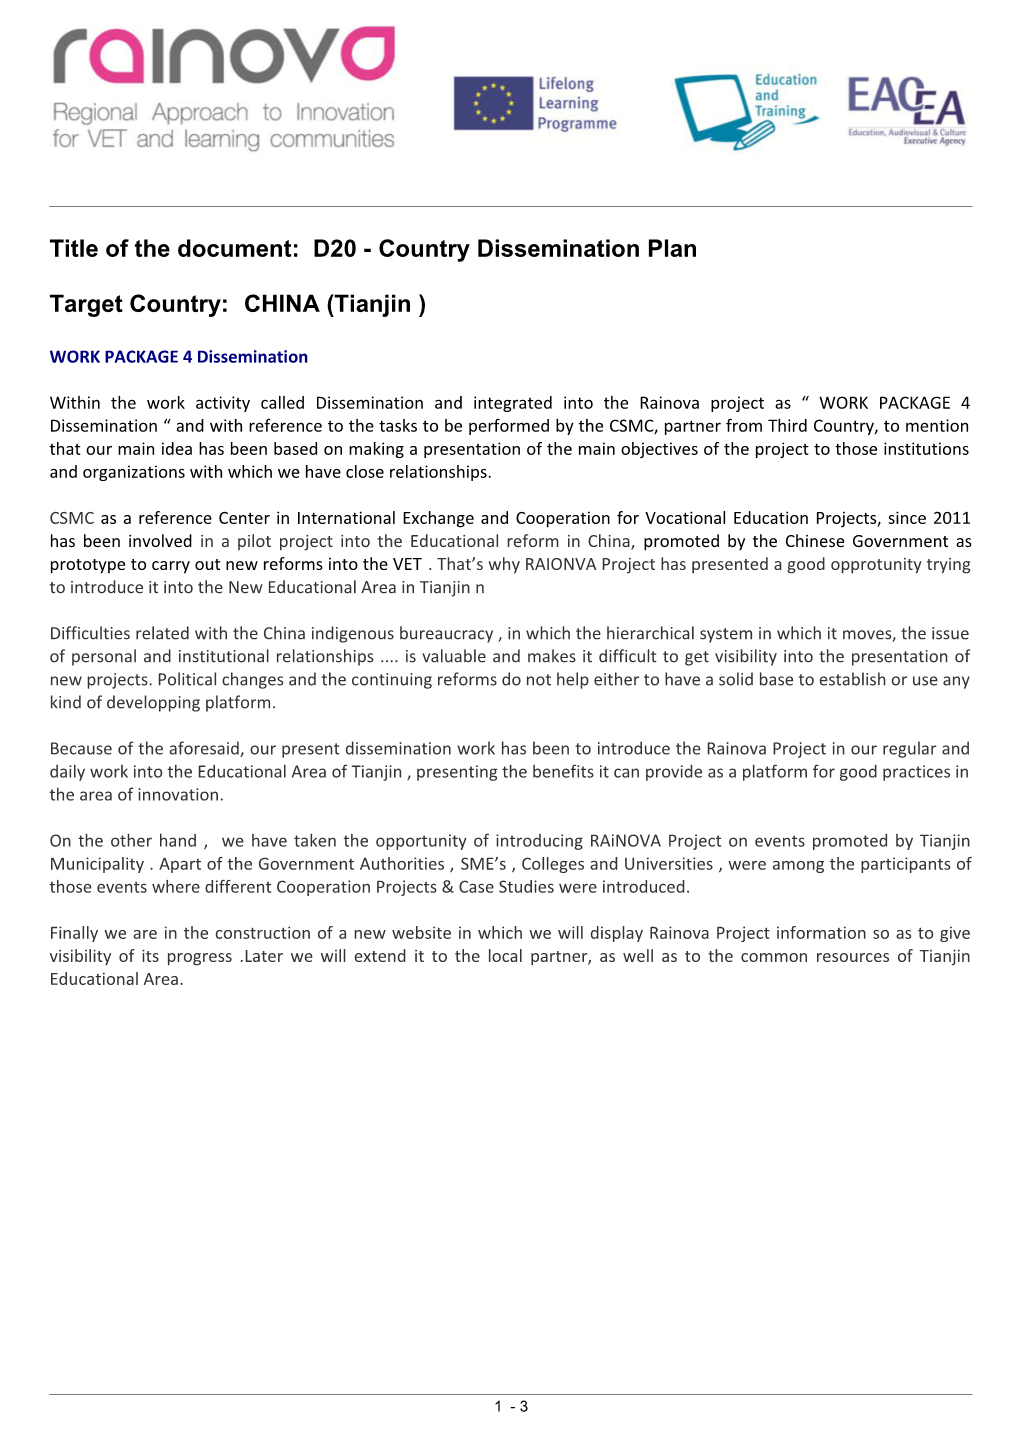 Title of the Document: D20 - Country Dissemination Plan